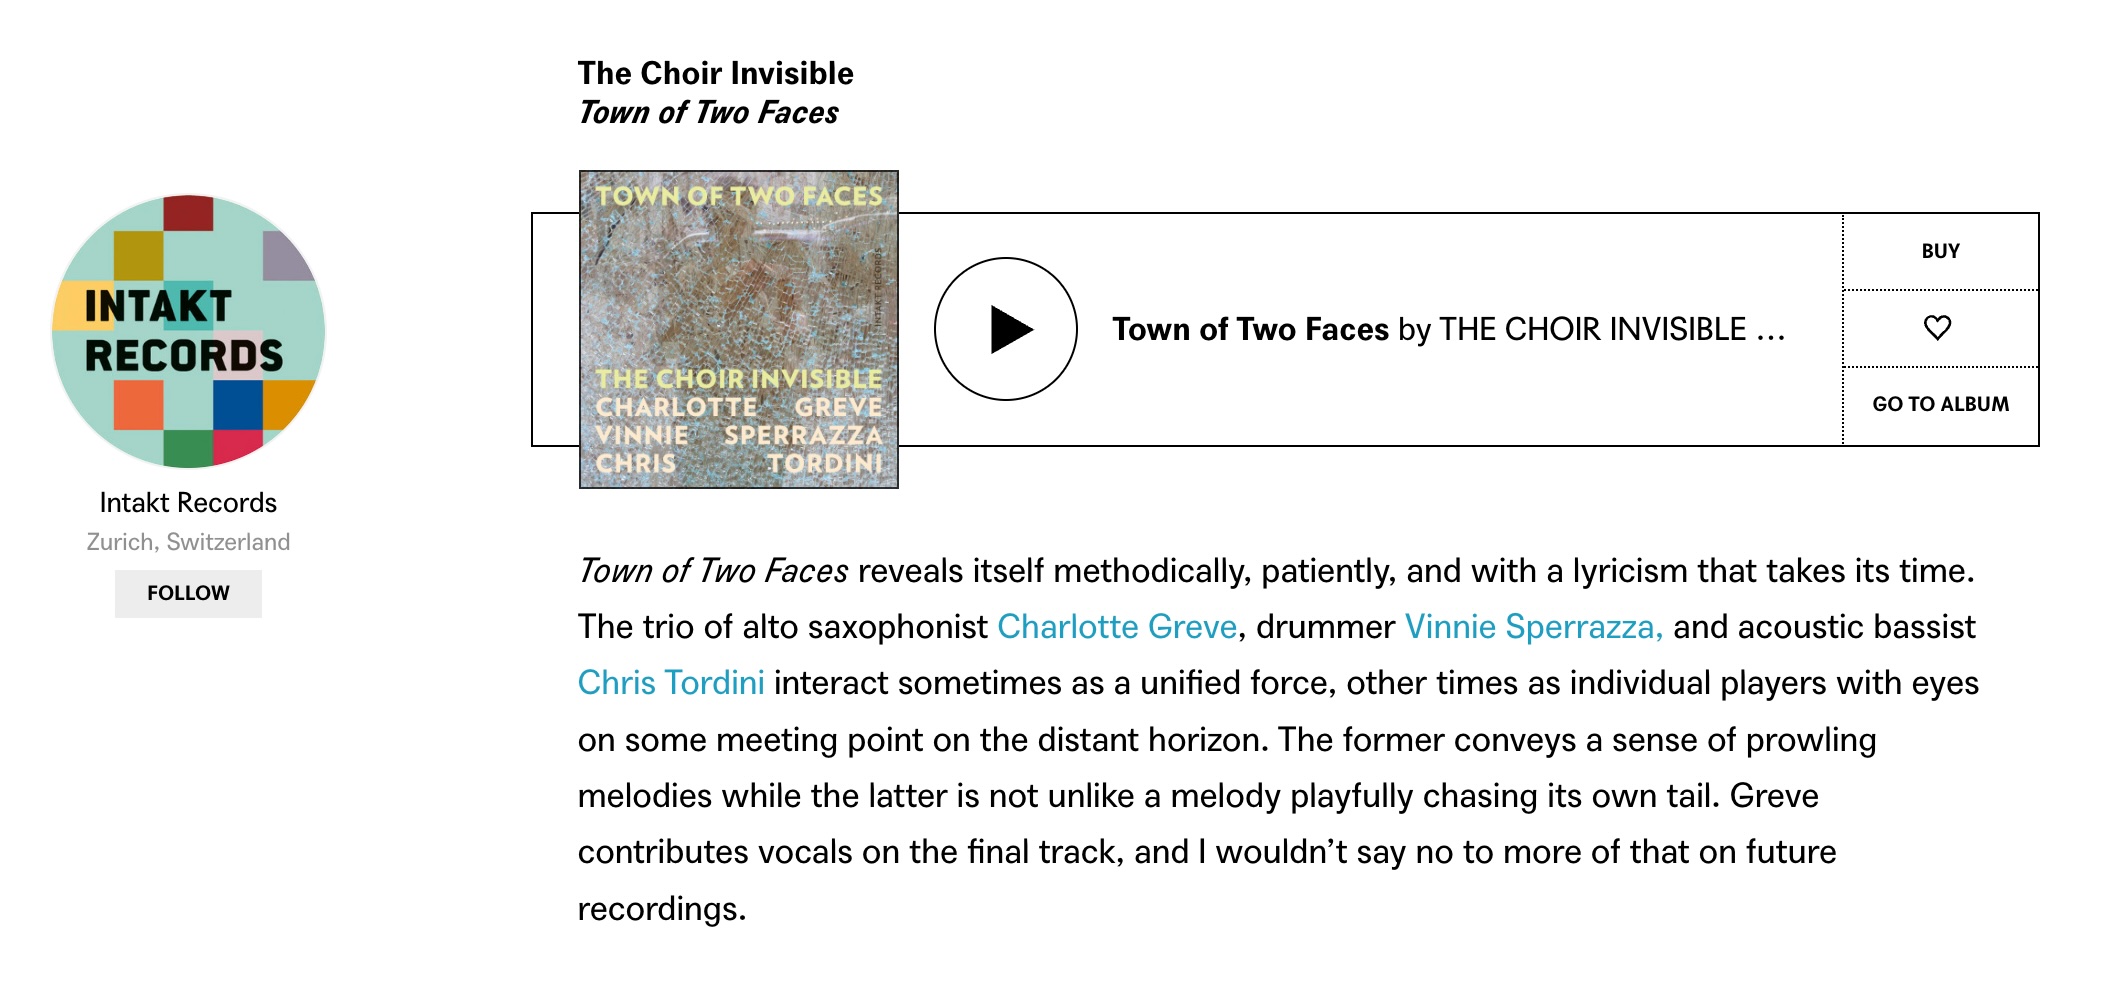 Town of Two Faces reveals itself methodically, patiently, and with a lyricism that takes its time. The trio of alto saxophonist Charlotte Greve, drummer Vinnie Sperrazza, and acoustic bassist Chris Tordini interact sometimes as a unified force, other times as individual players with eyes on some meeting point on the distant horizon. The former conveys a sense of prowling melodies while the latter is not unlike a melody playfully chasing its own tail. Greve contributes vocals on the final track, and I wouldn’t say no to more of that on future recordings.